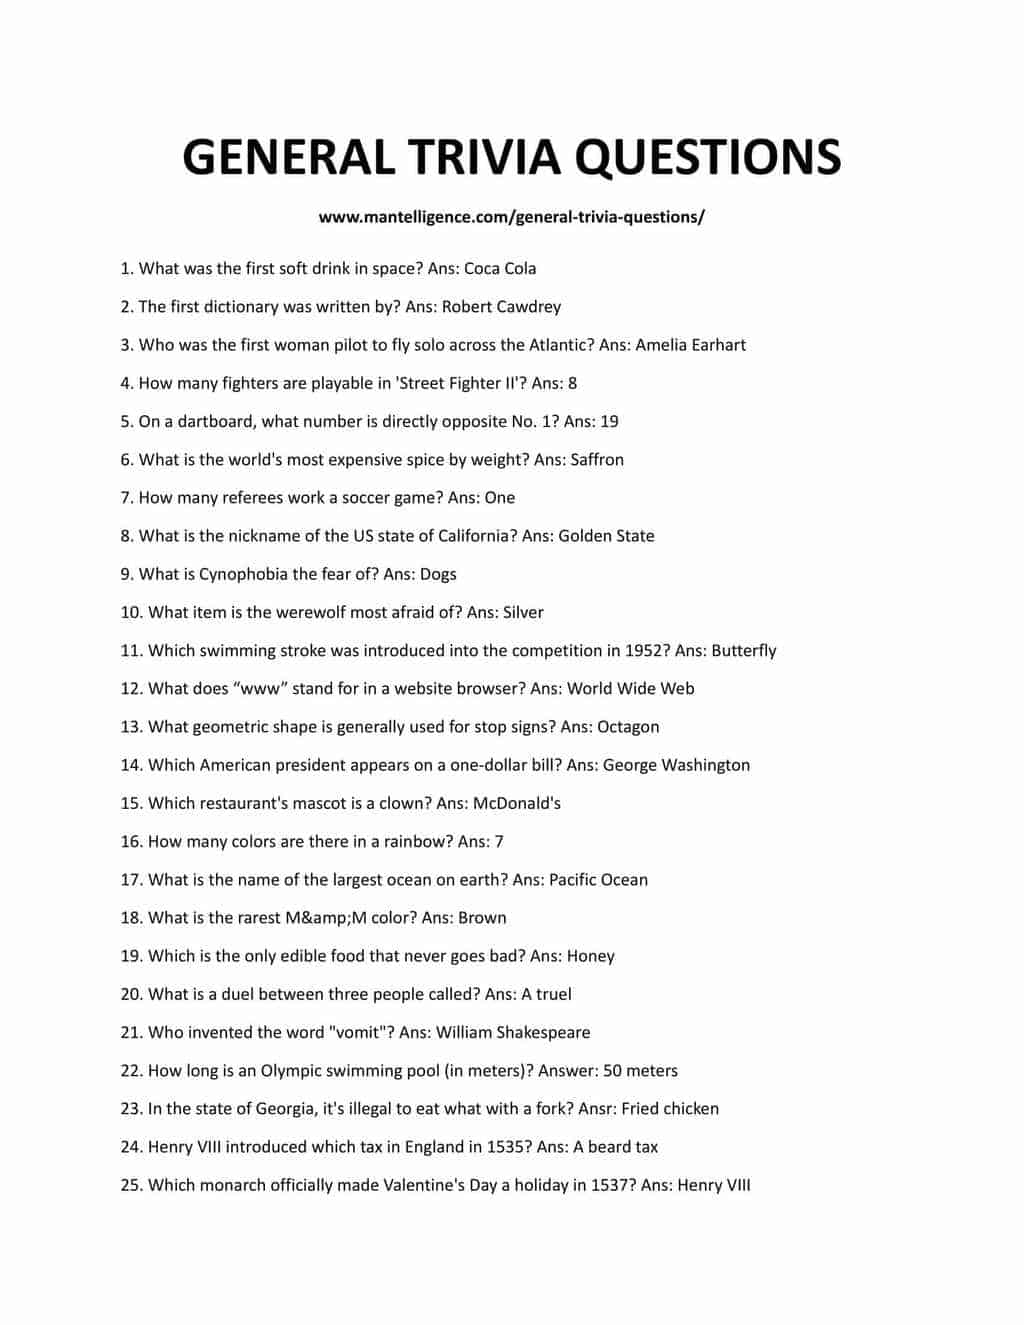 Downloadable list of the questions